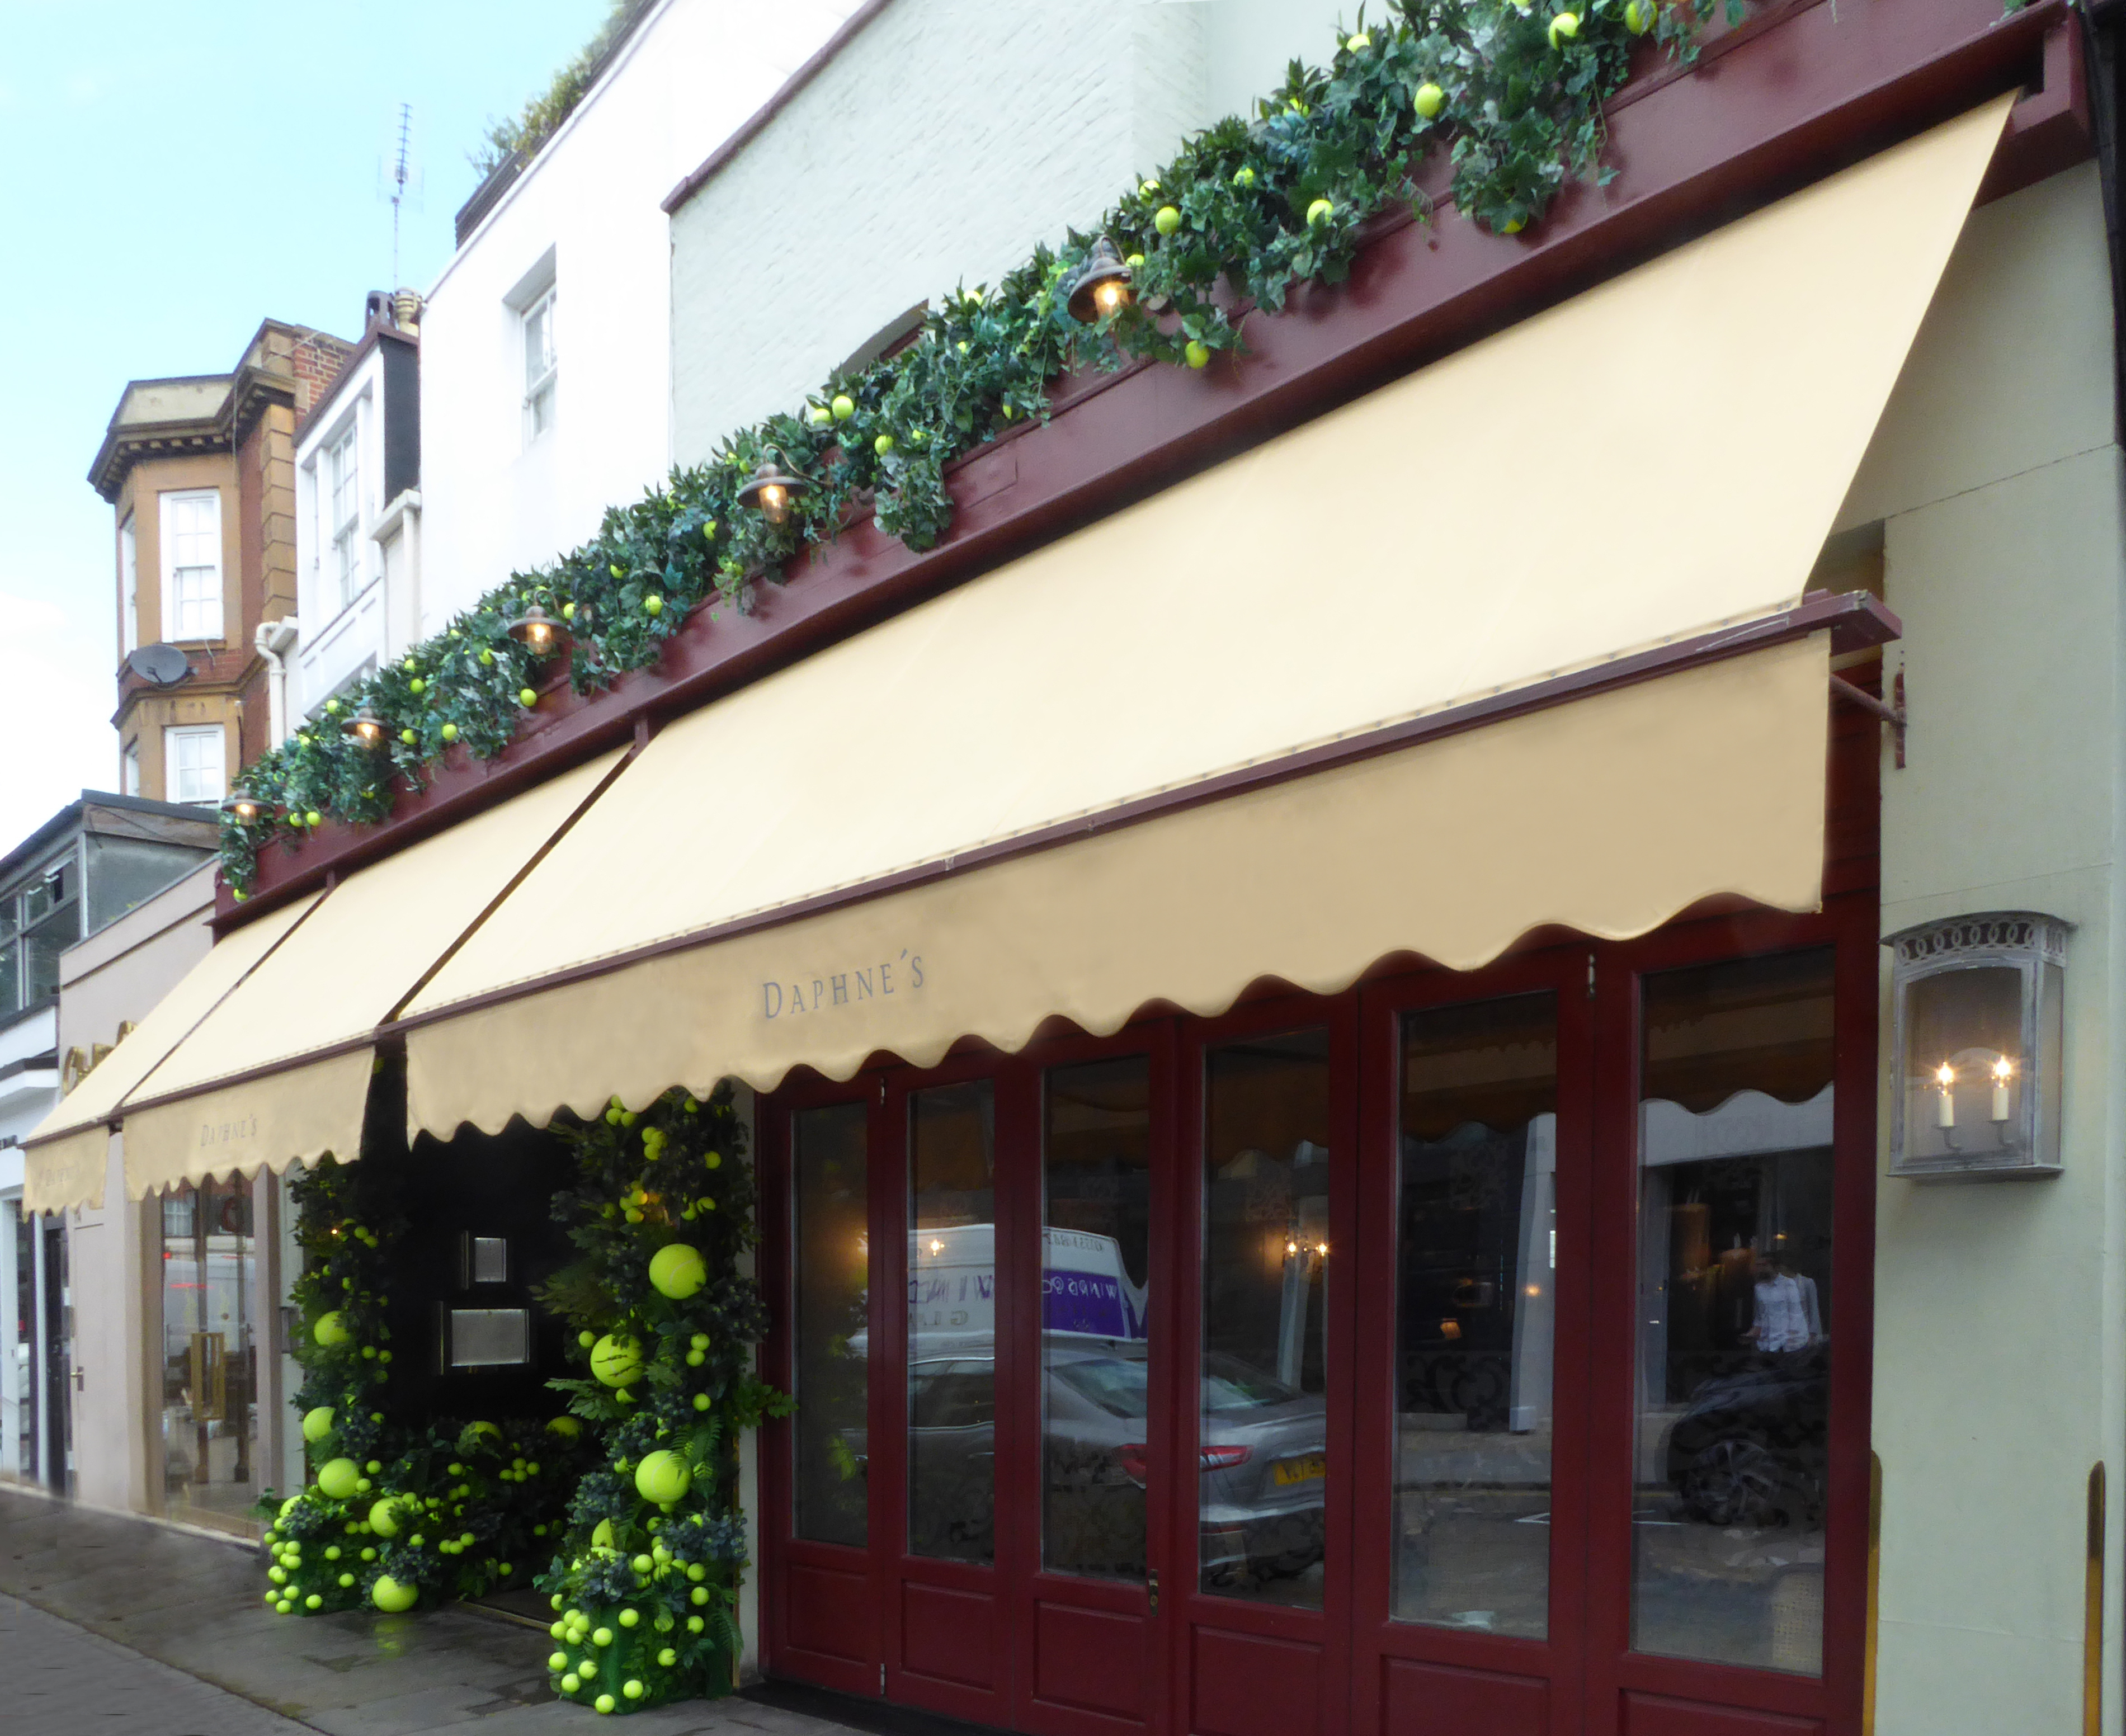 Victorian awning Daphne's